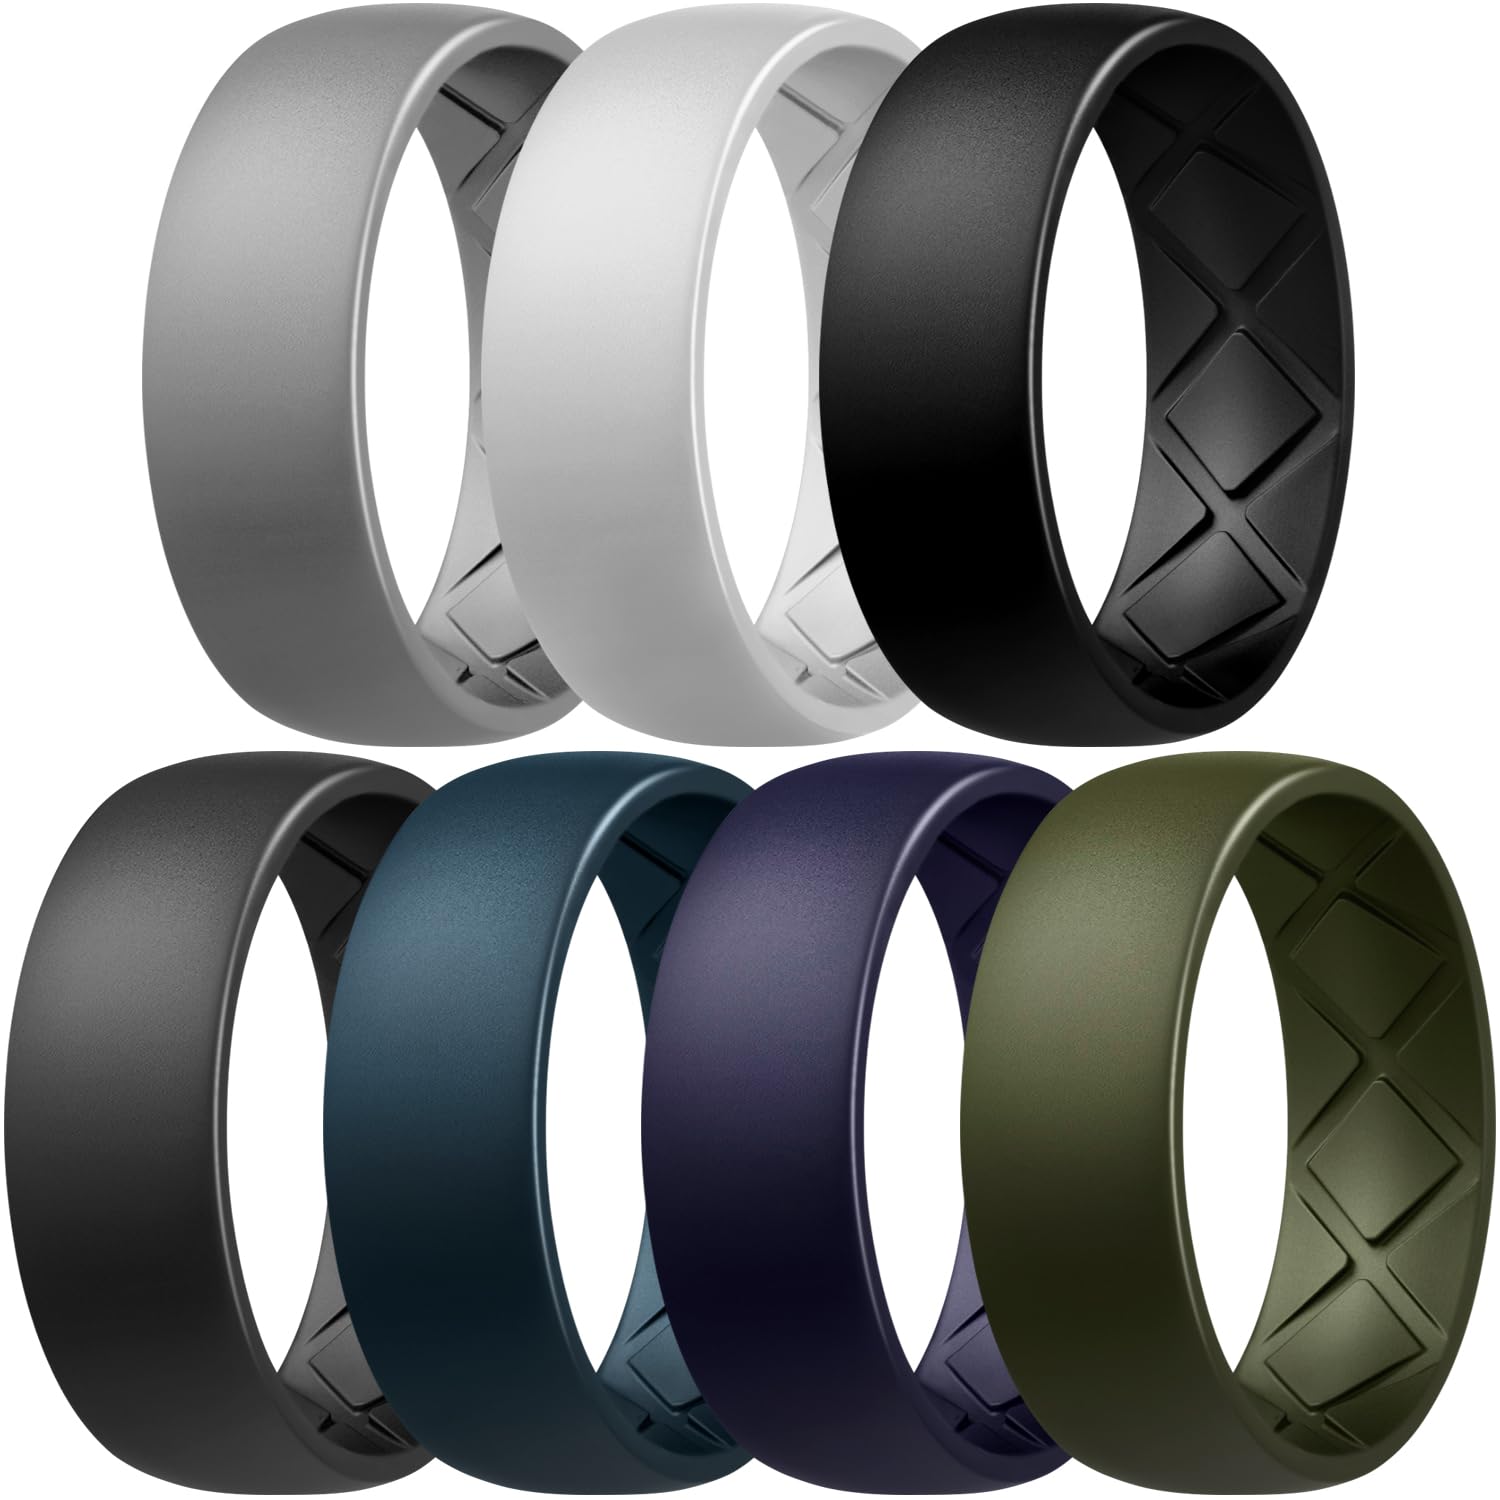 Egnaro Silicone Rings for Men with Half Sizes Inner Arc Ergonomic Breathable Design 7 Rings / 4 Rings / 1 Ring - Rubber Wedding Bands 8mm Wide 2.5mm Thick